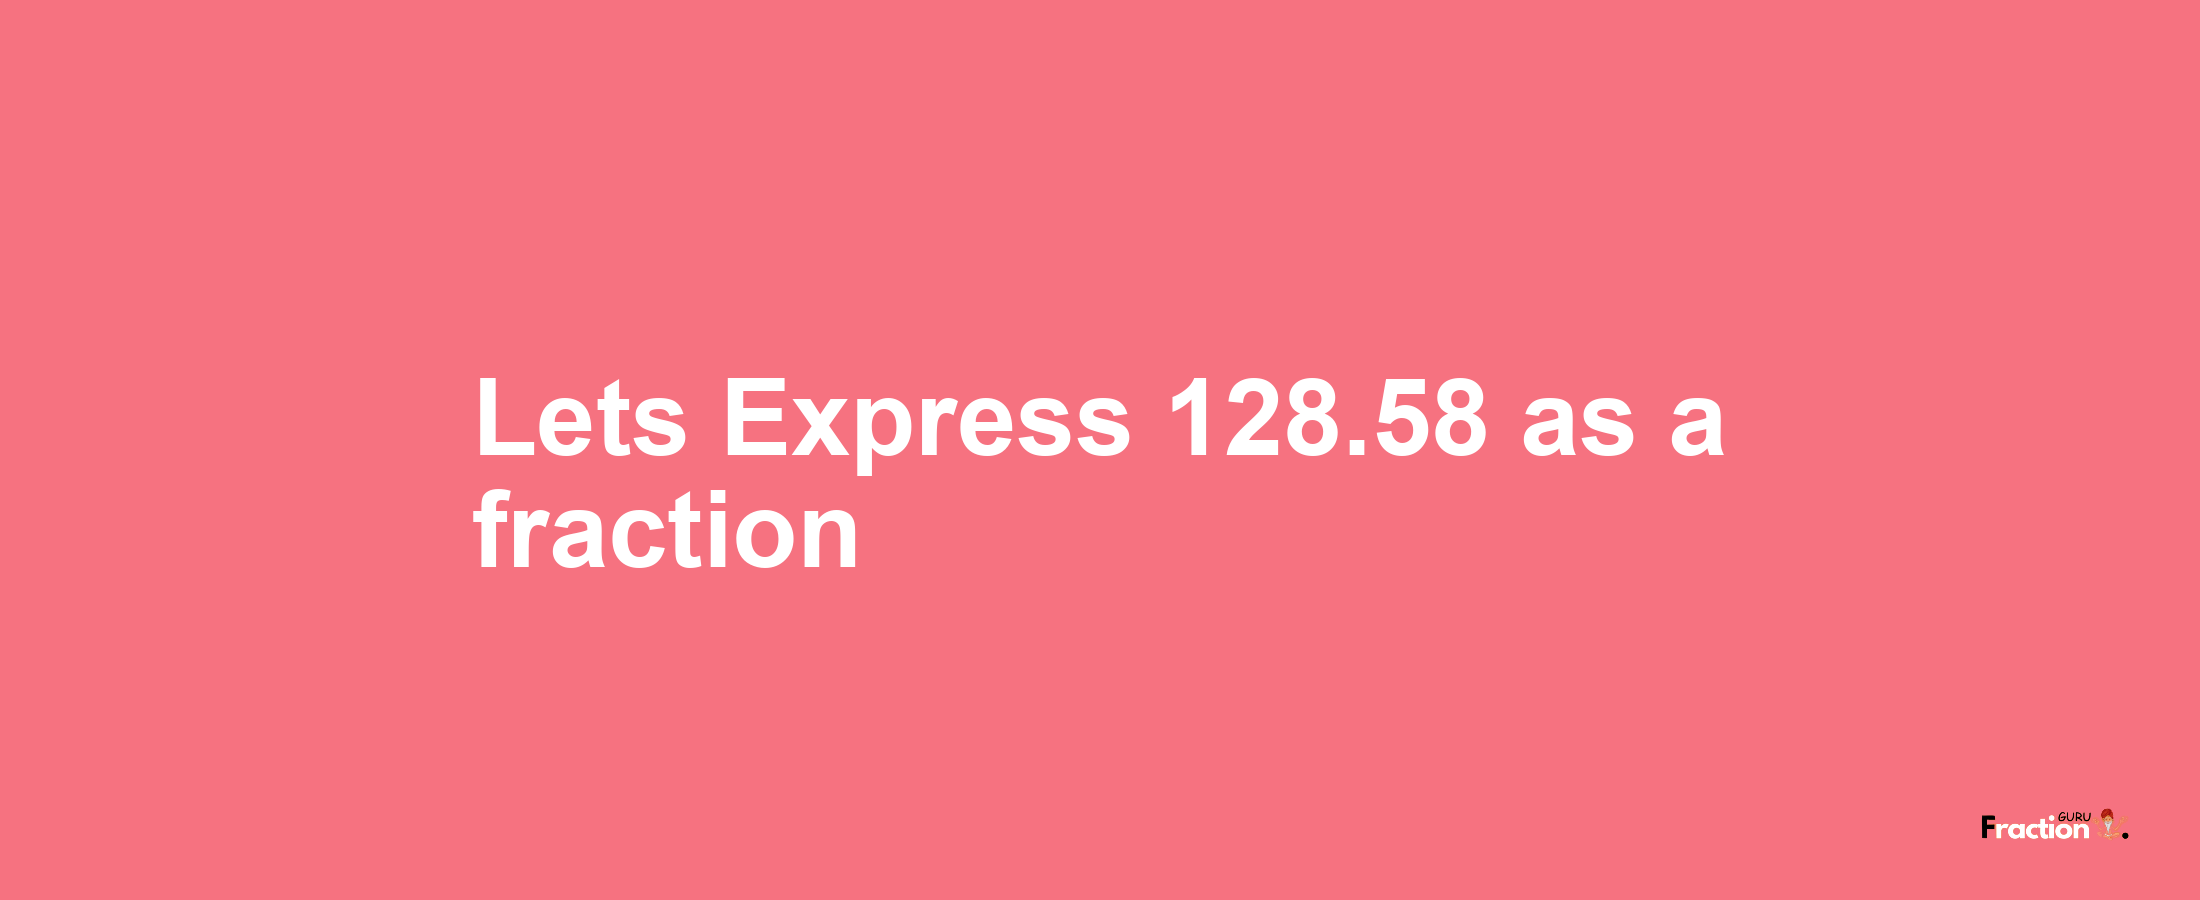 Lets Express 128.58 as afraction